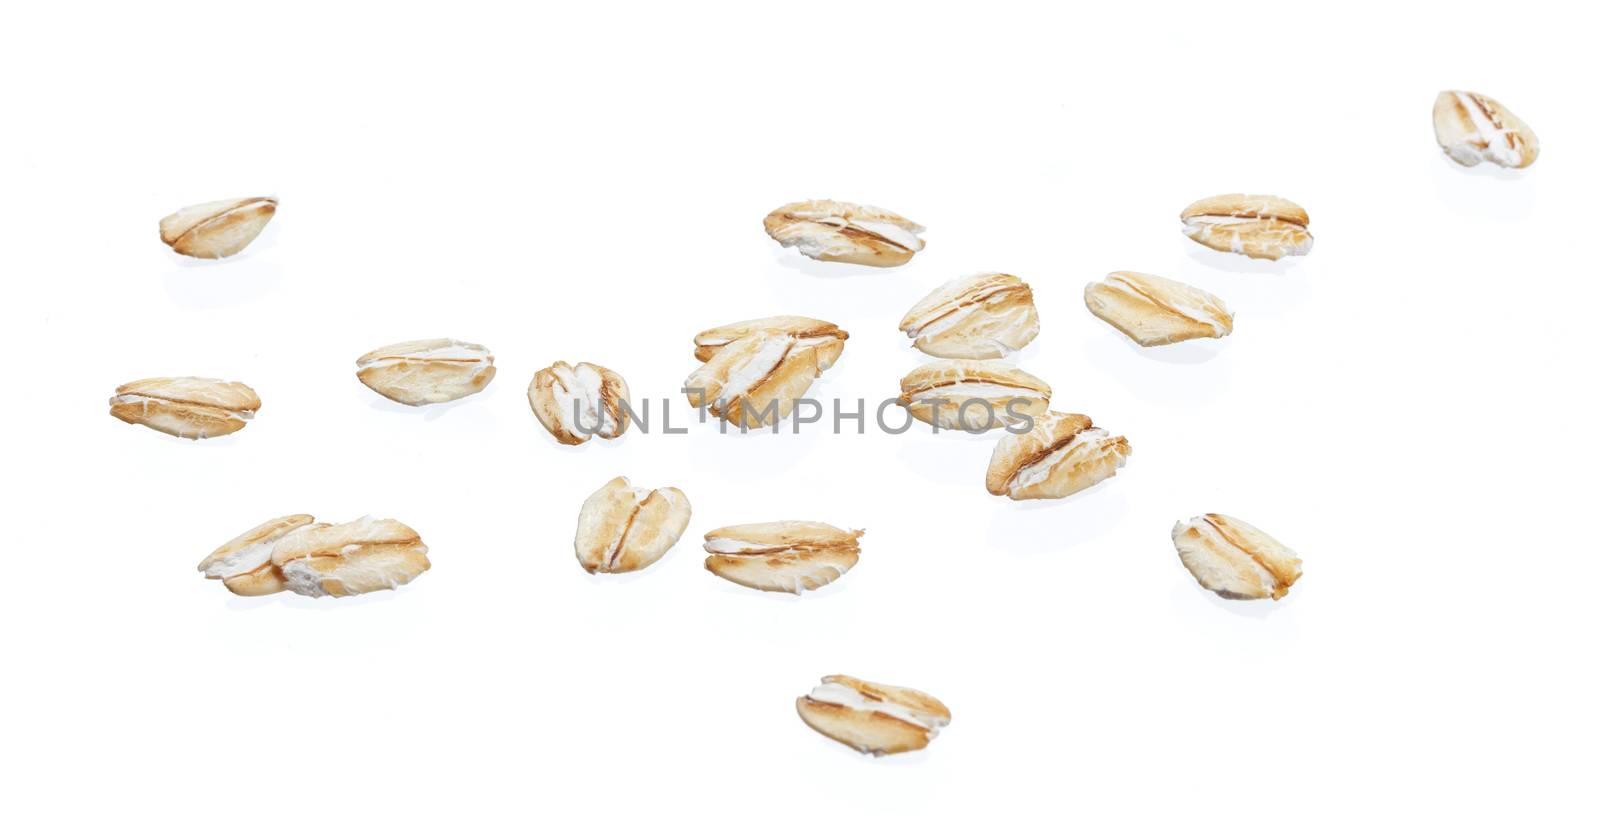 Oat flakes isolated on white background with clipping path. Close up.